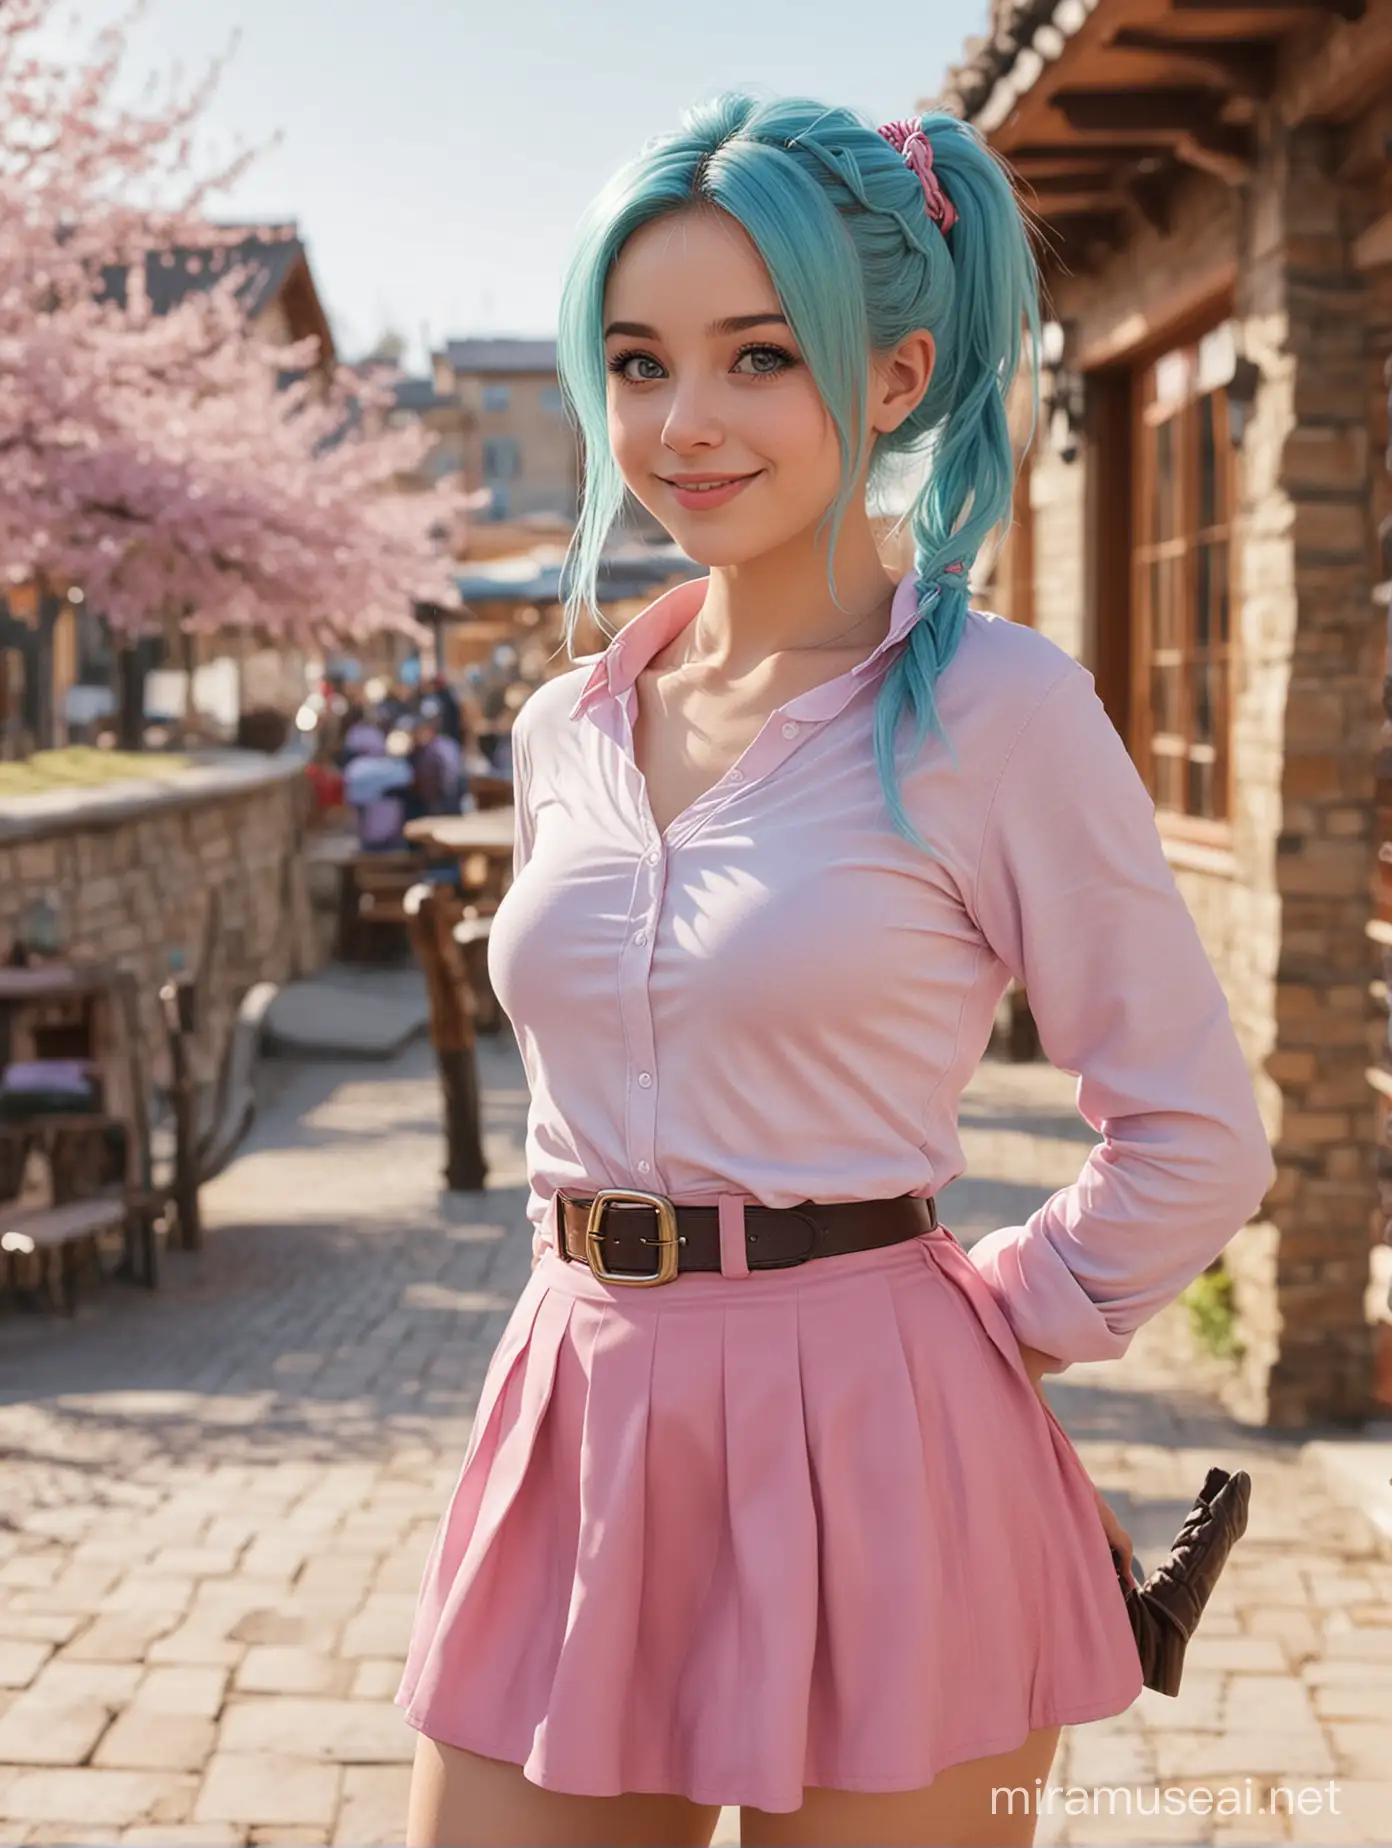 Cute Girl with Dragon Ball Inspired Style in Detailed Outdoor Setting